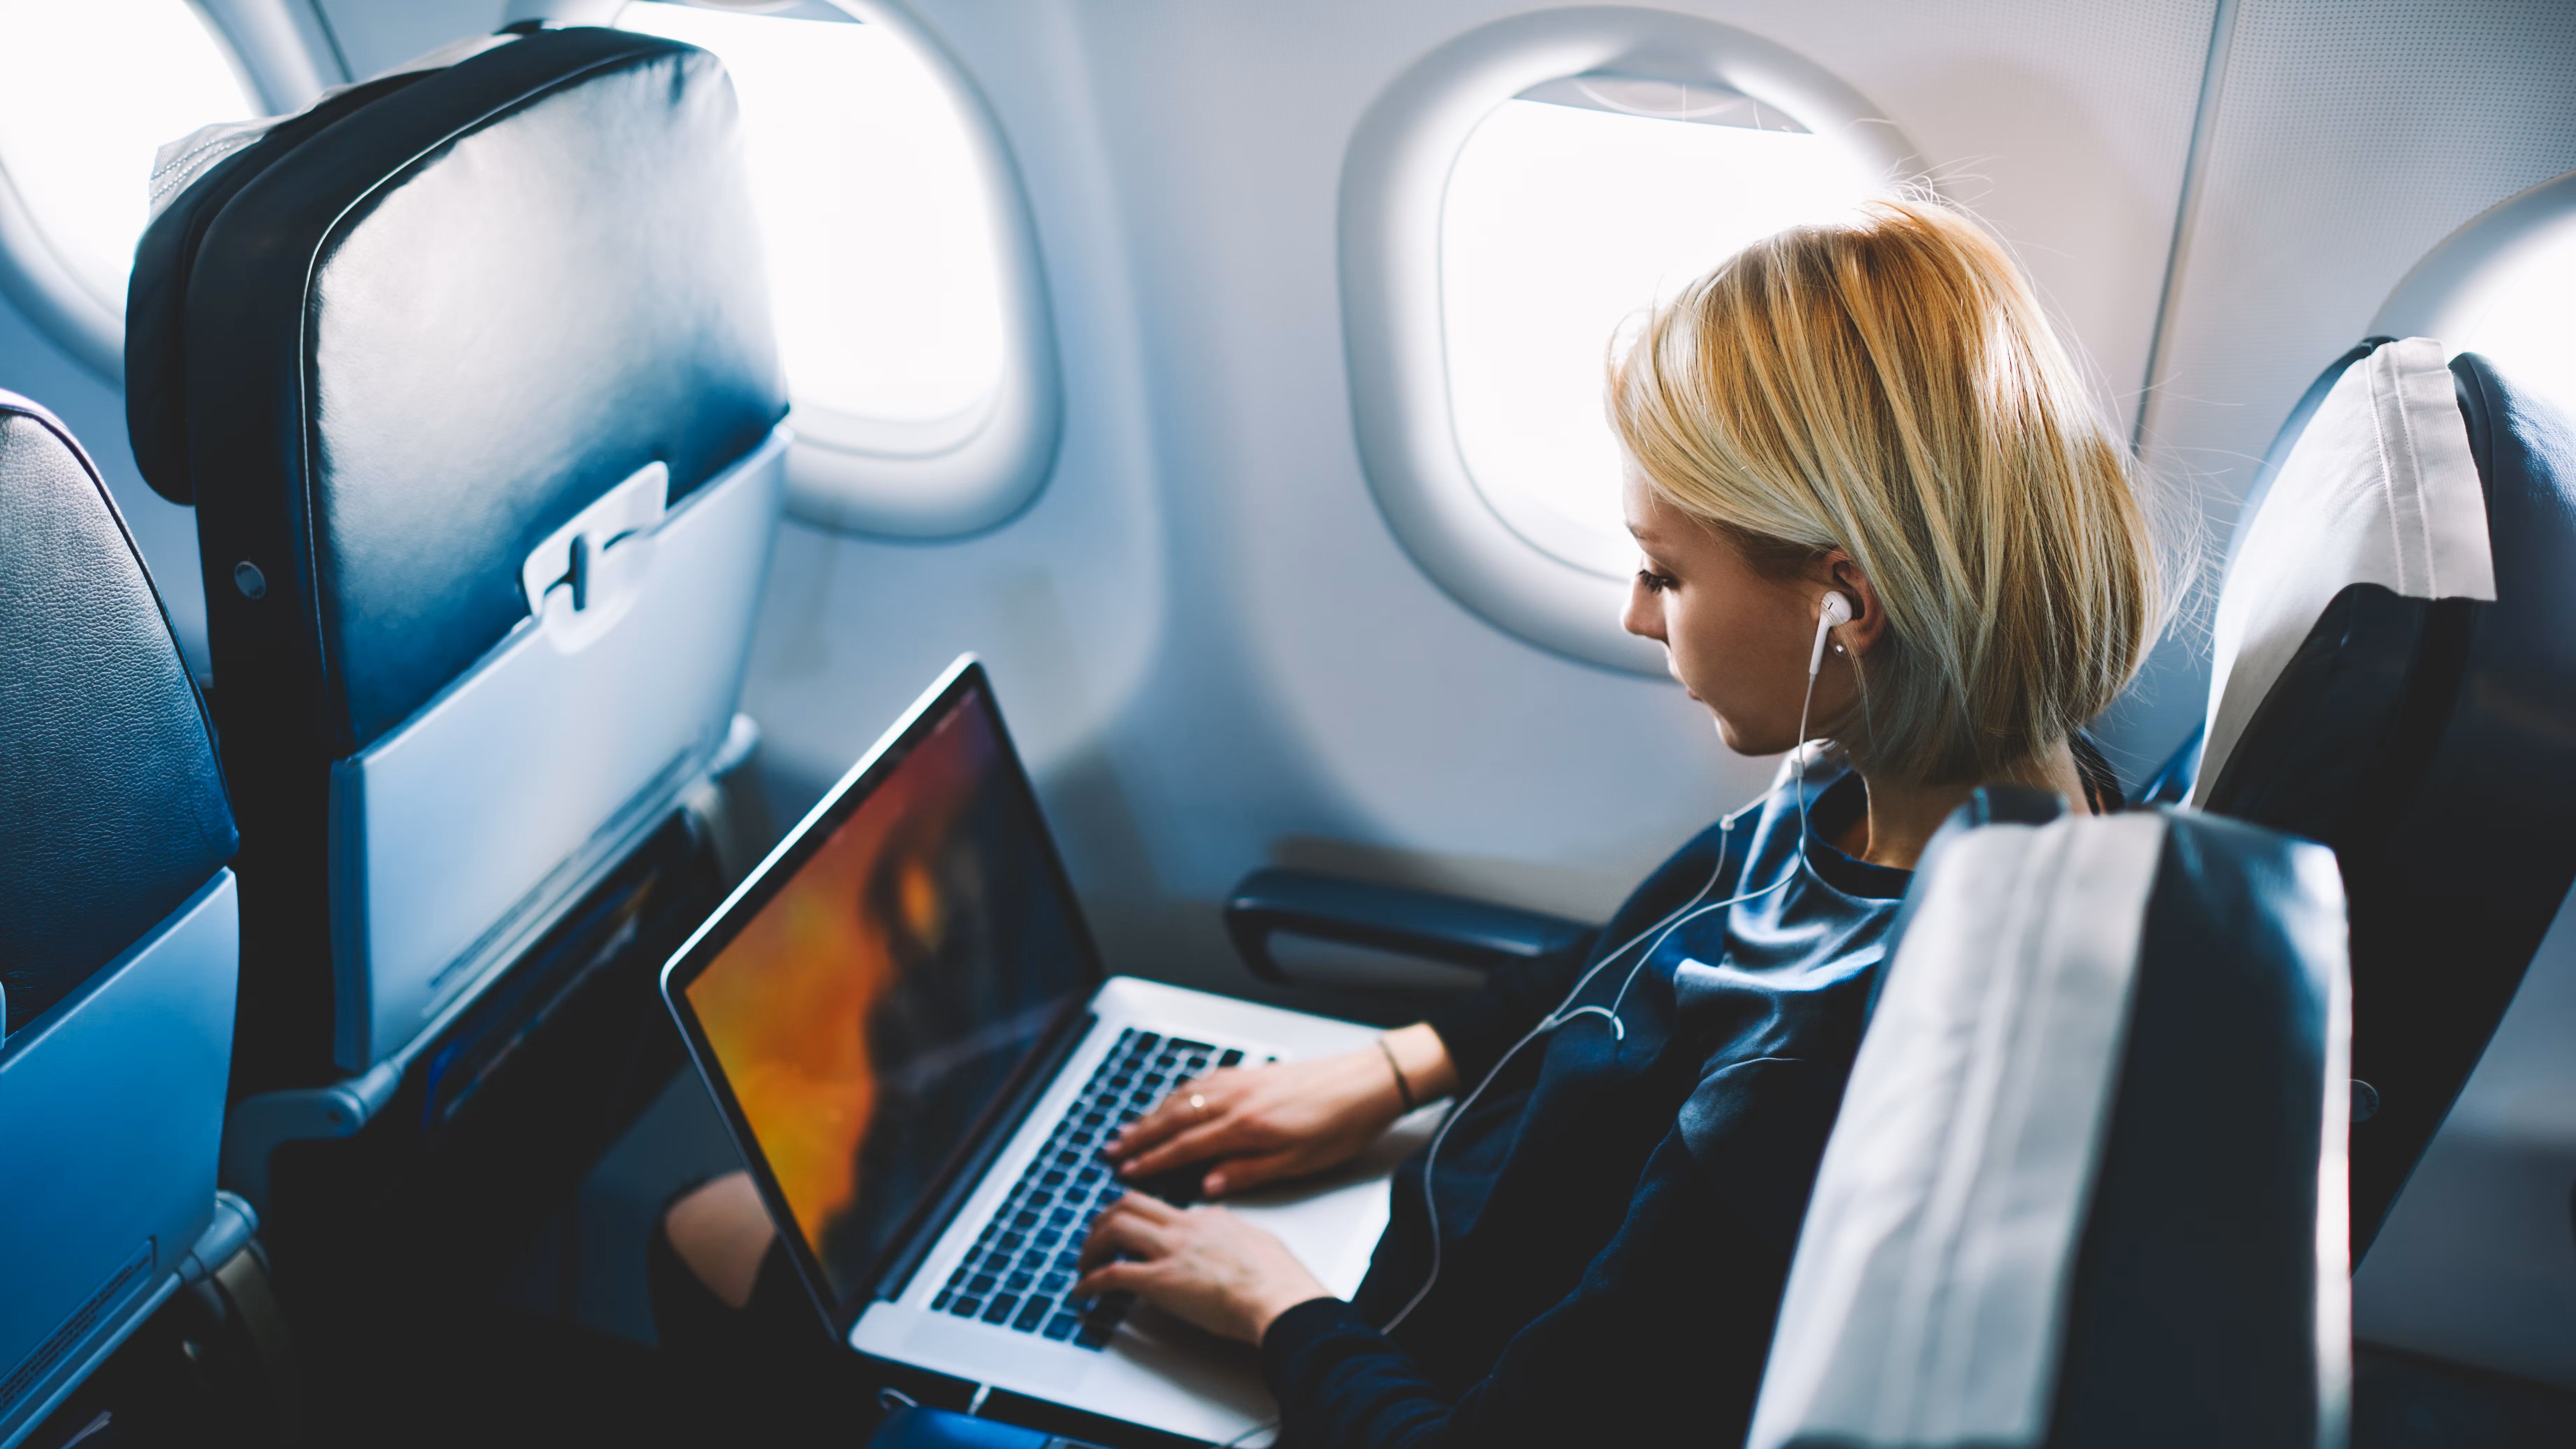 A woman using her laptop on an airplane.